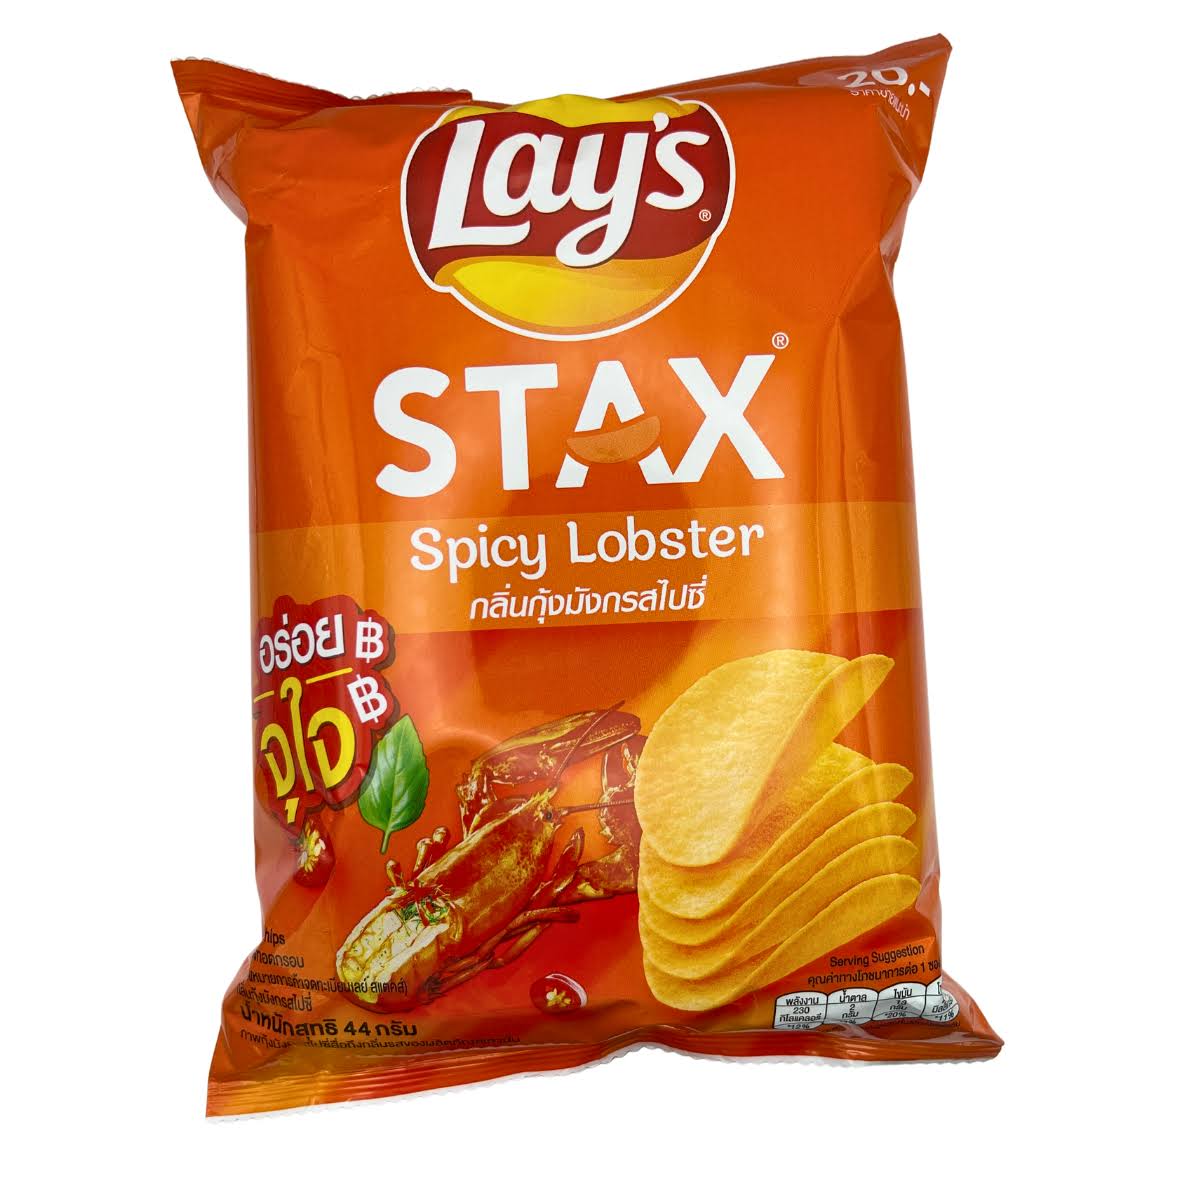 Lay’s STAX Spicy Lobster